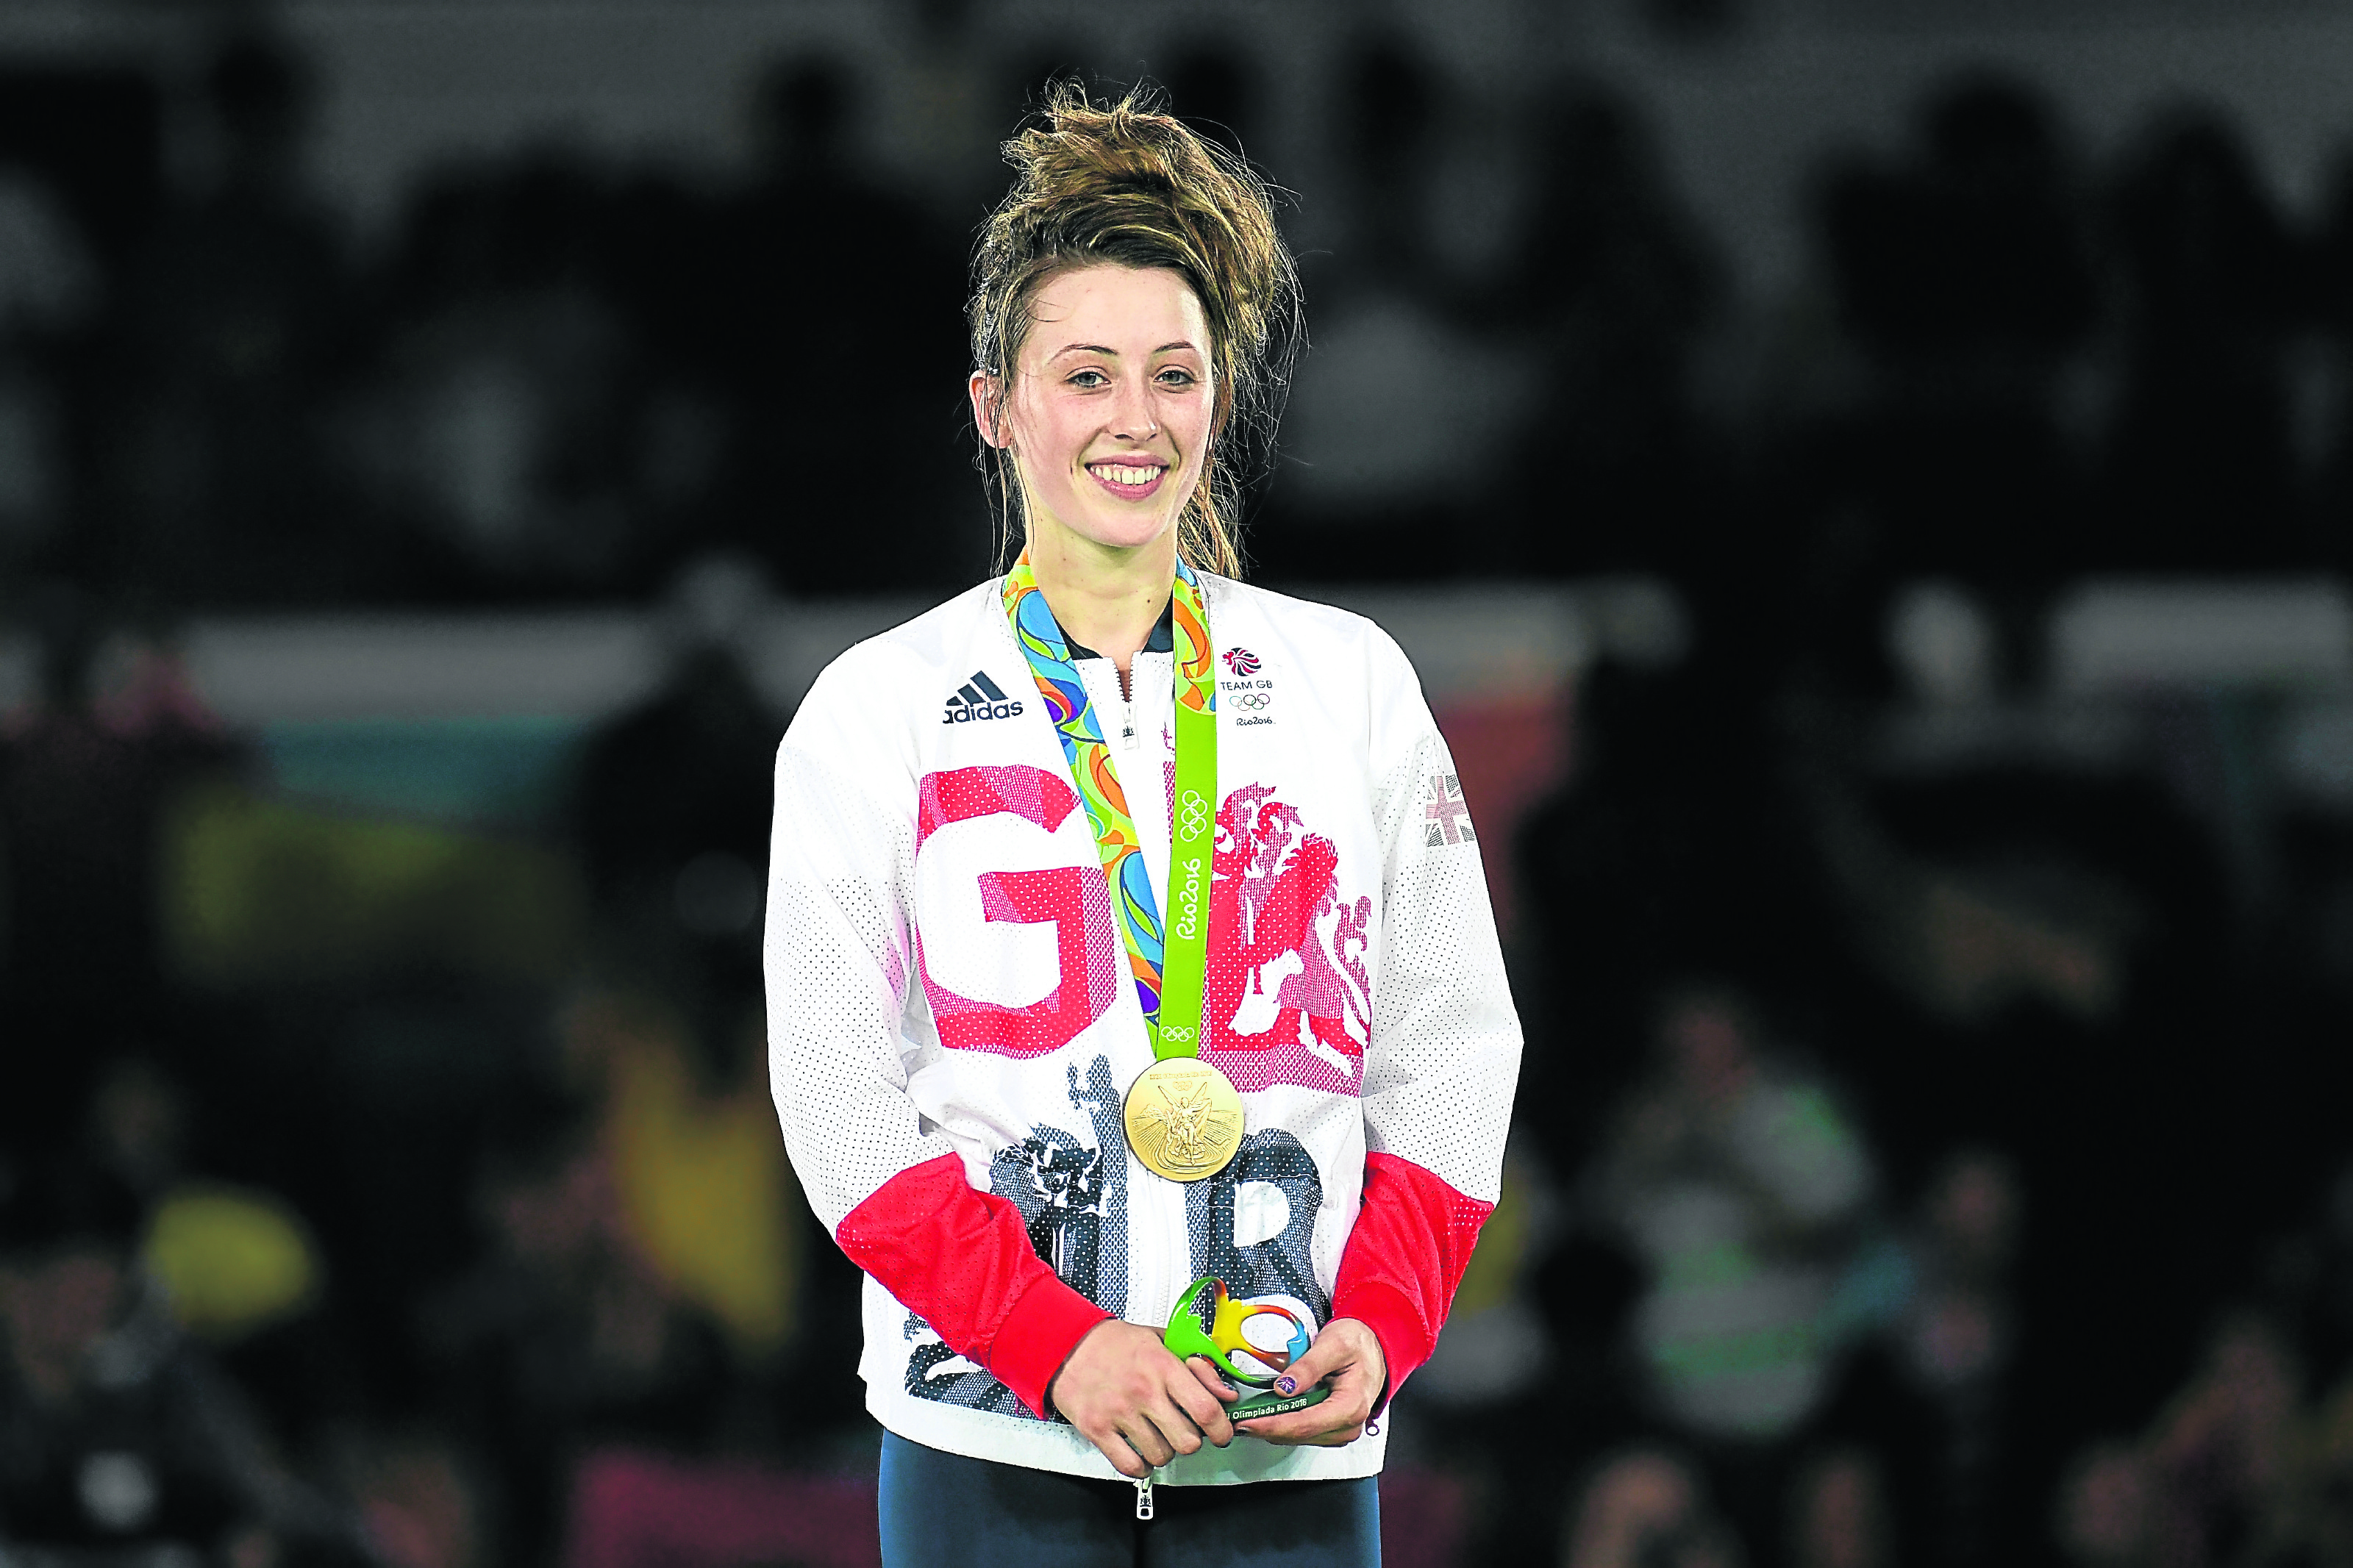 Gold medallist, Jade Jones of Great Britain celebrates after defeating Eva Calvo Gomez of Spain during the Women's -57kg Gold Medal Taekwondo contest (Photo by Laurence Griffiths/Getty Images)